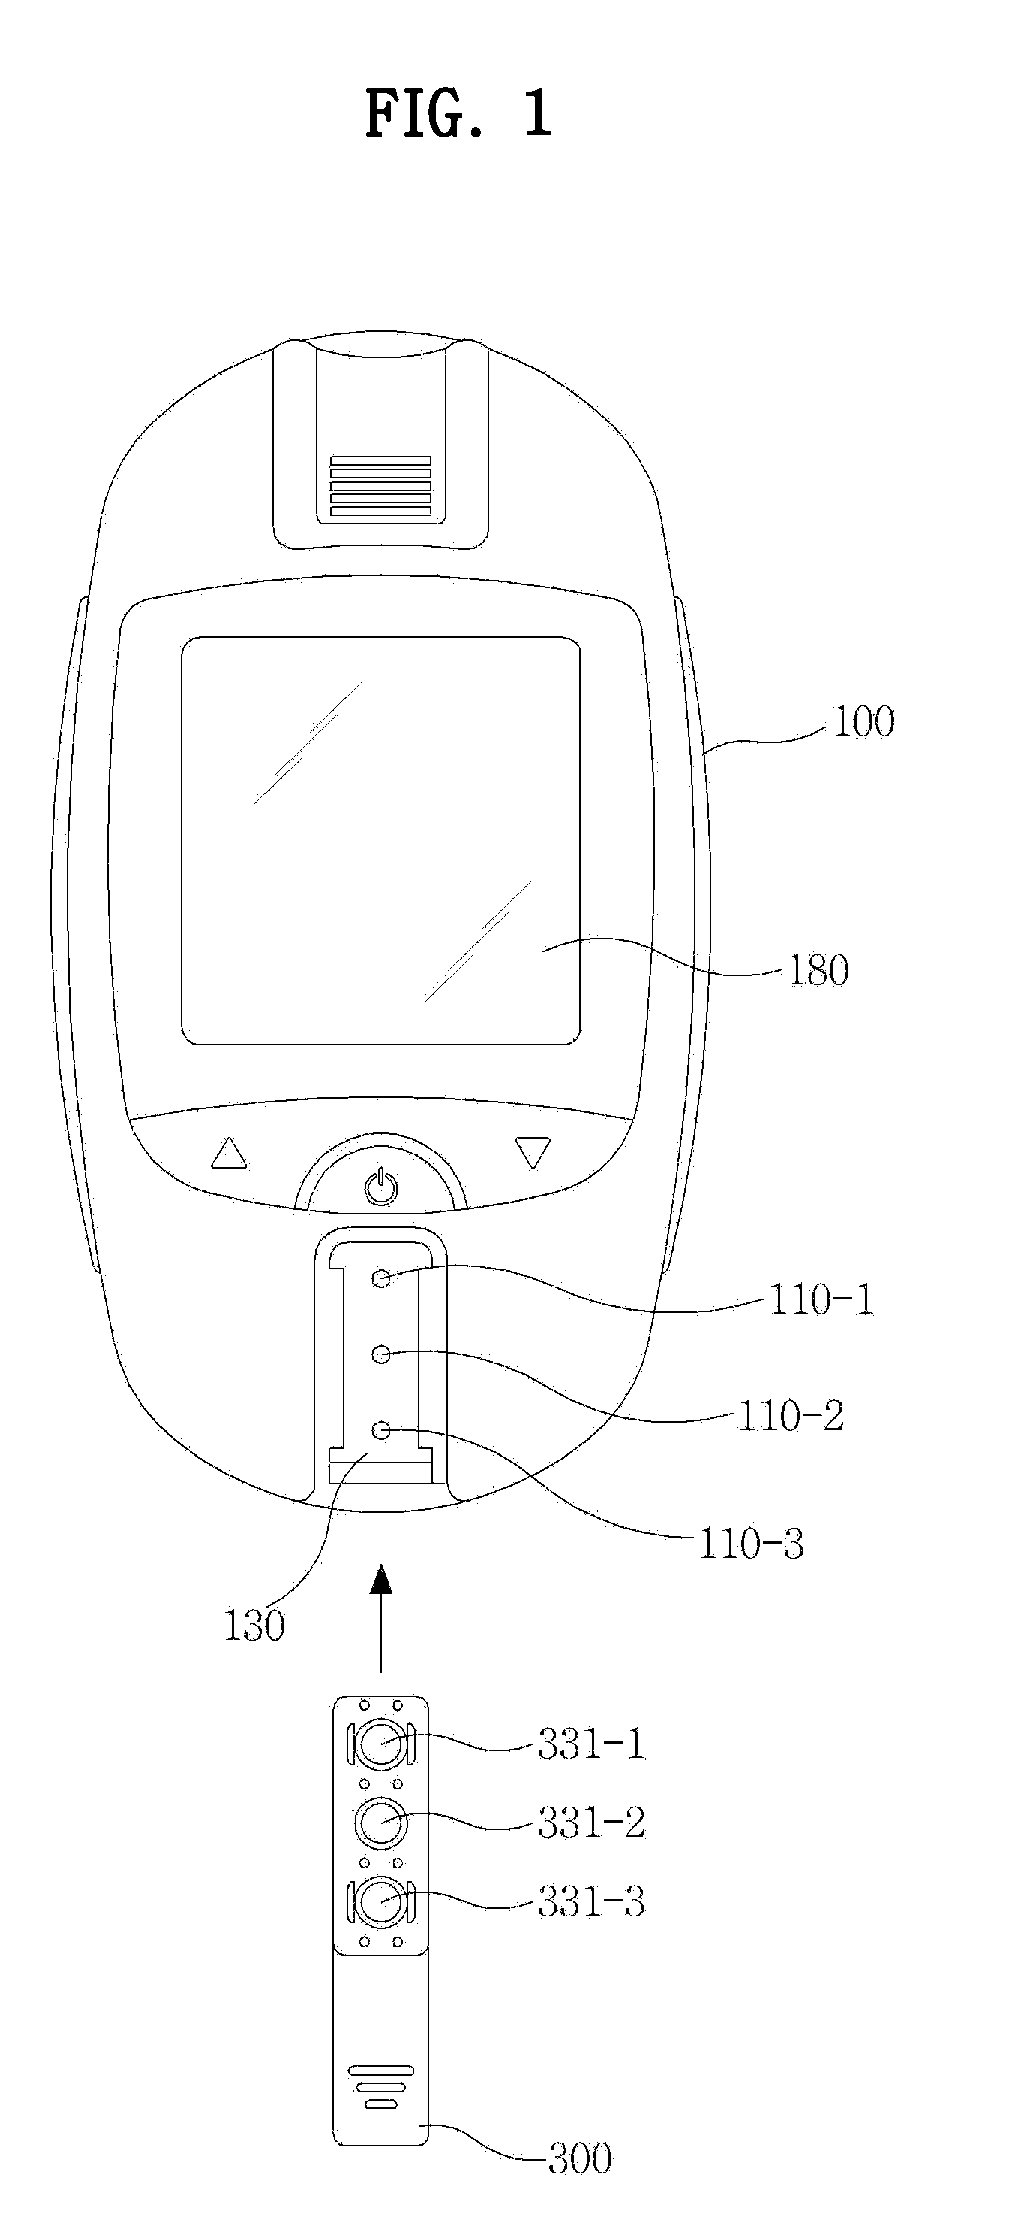 Apparatus and method for measuring biomedical data using algorithm for improving reproducibility